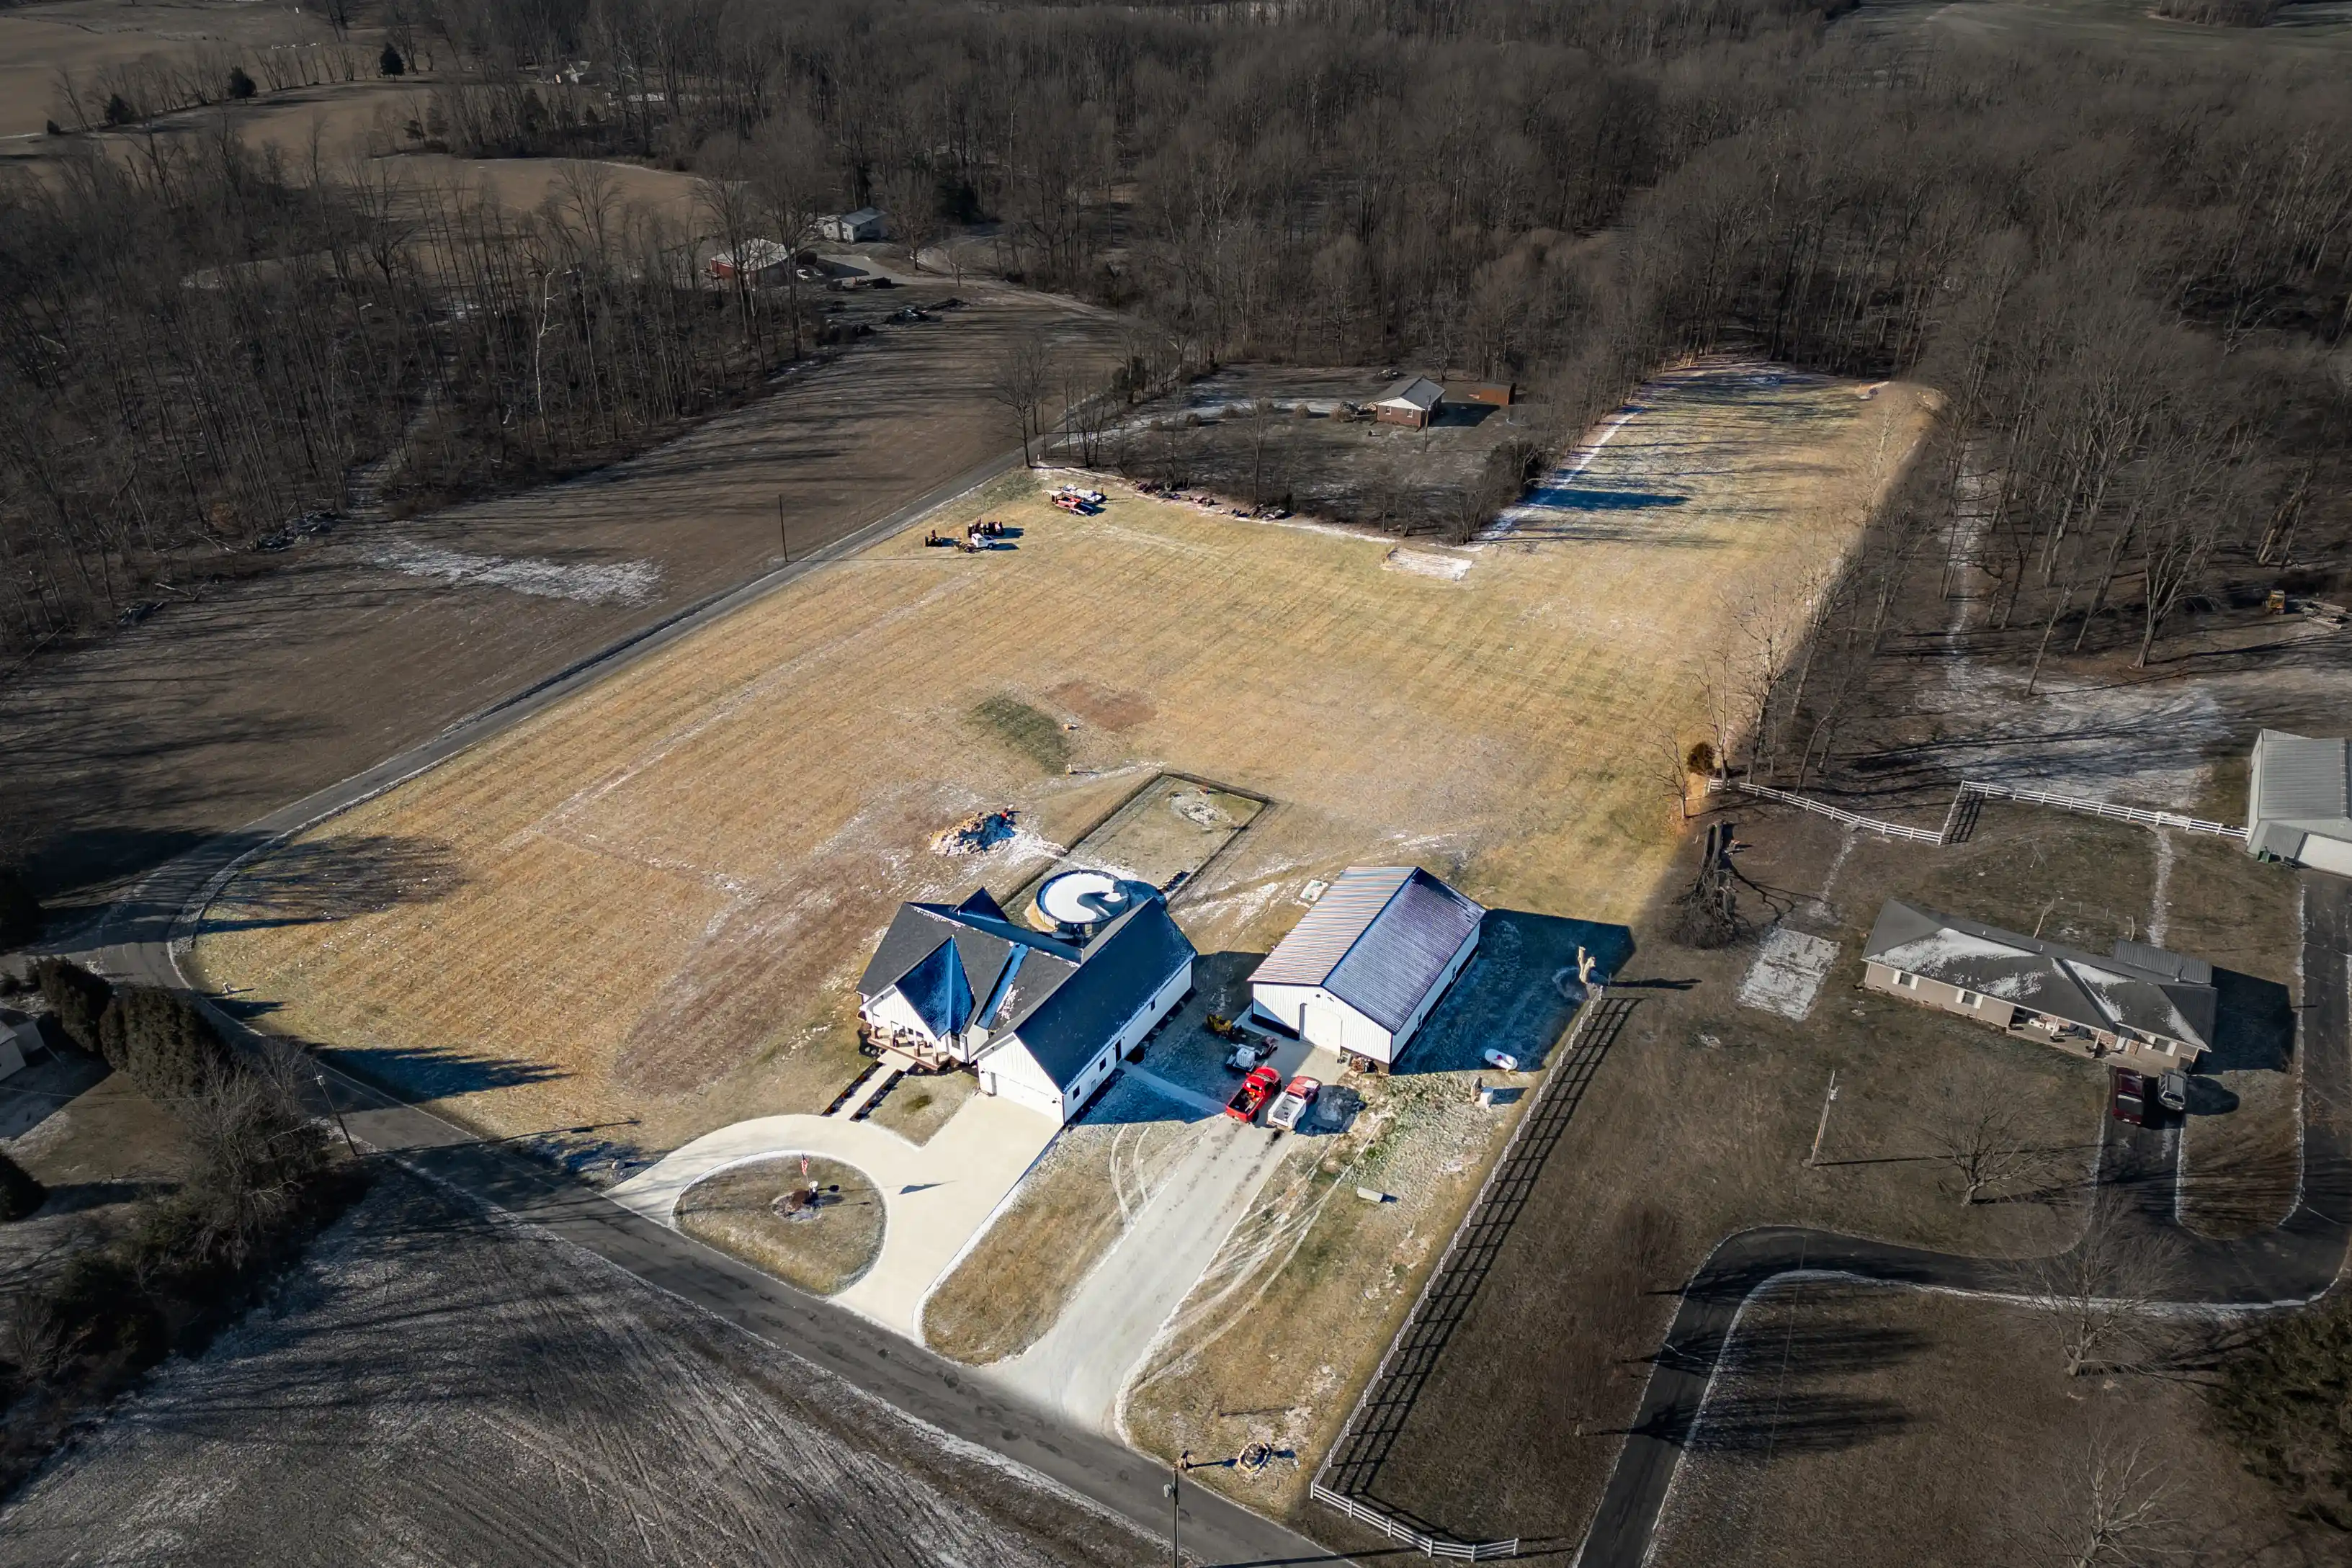 Aerial view of a rural property with a large blue-roofed house, adjacent buildings, a circular driveway, a swimming pool, and surrounding barren fields and trees.